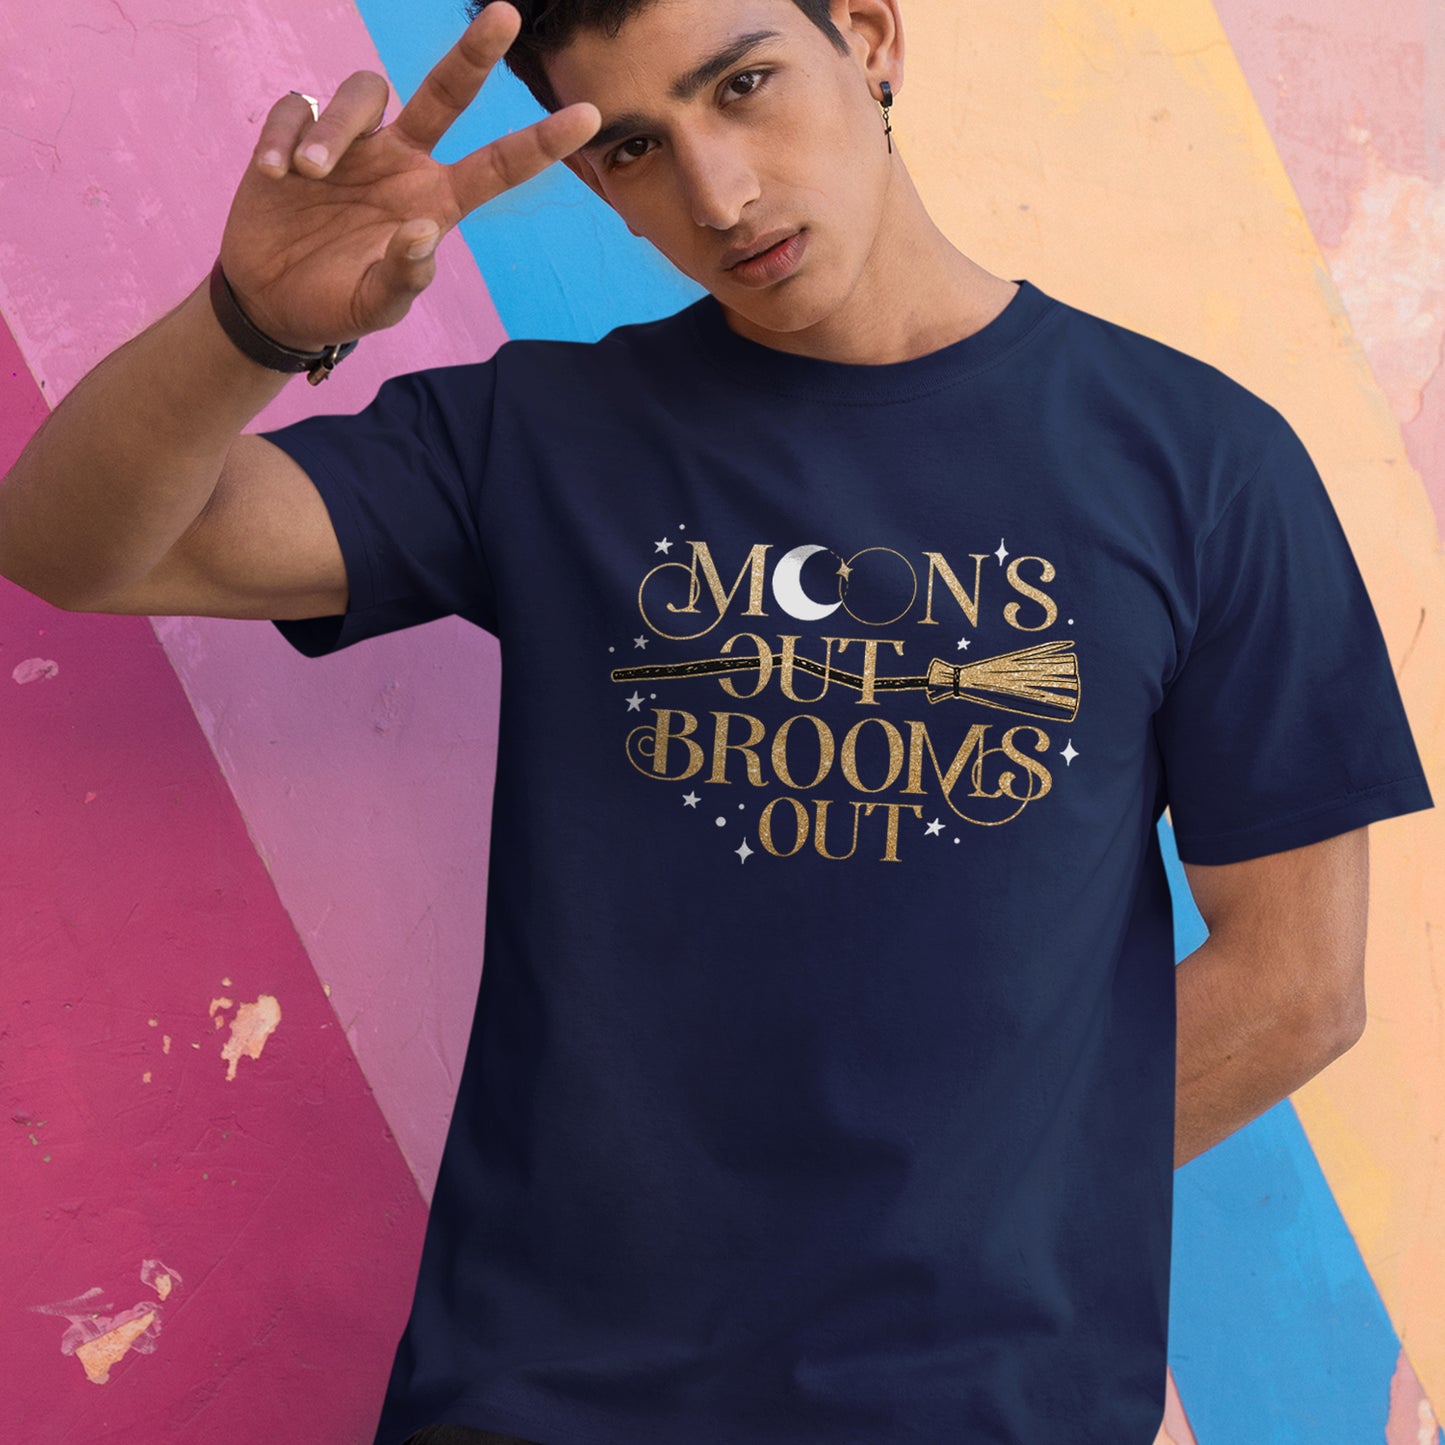 A male model wearing a dark teal, short-sleeved, crewneck tee with a gold print reading "Moon's Out Brooms Out". There are a gold broom going through the first "Out" and small white stars dotting the print space. The first "O" in "Moon" contains a white crescent moon.  Behind the model is a striped wall in rainbow colors.